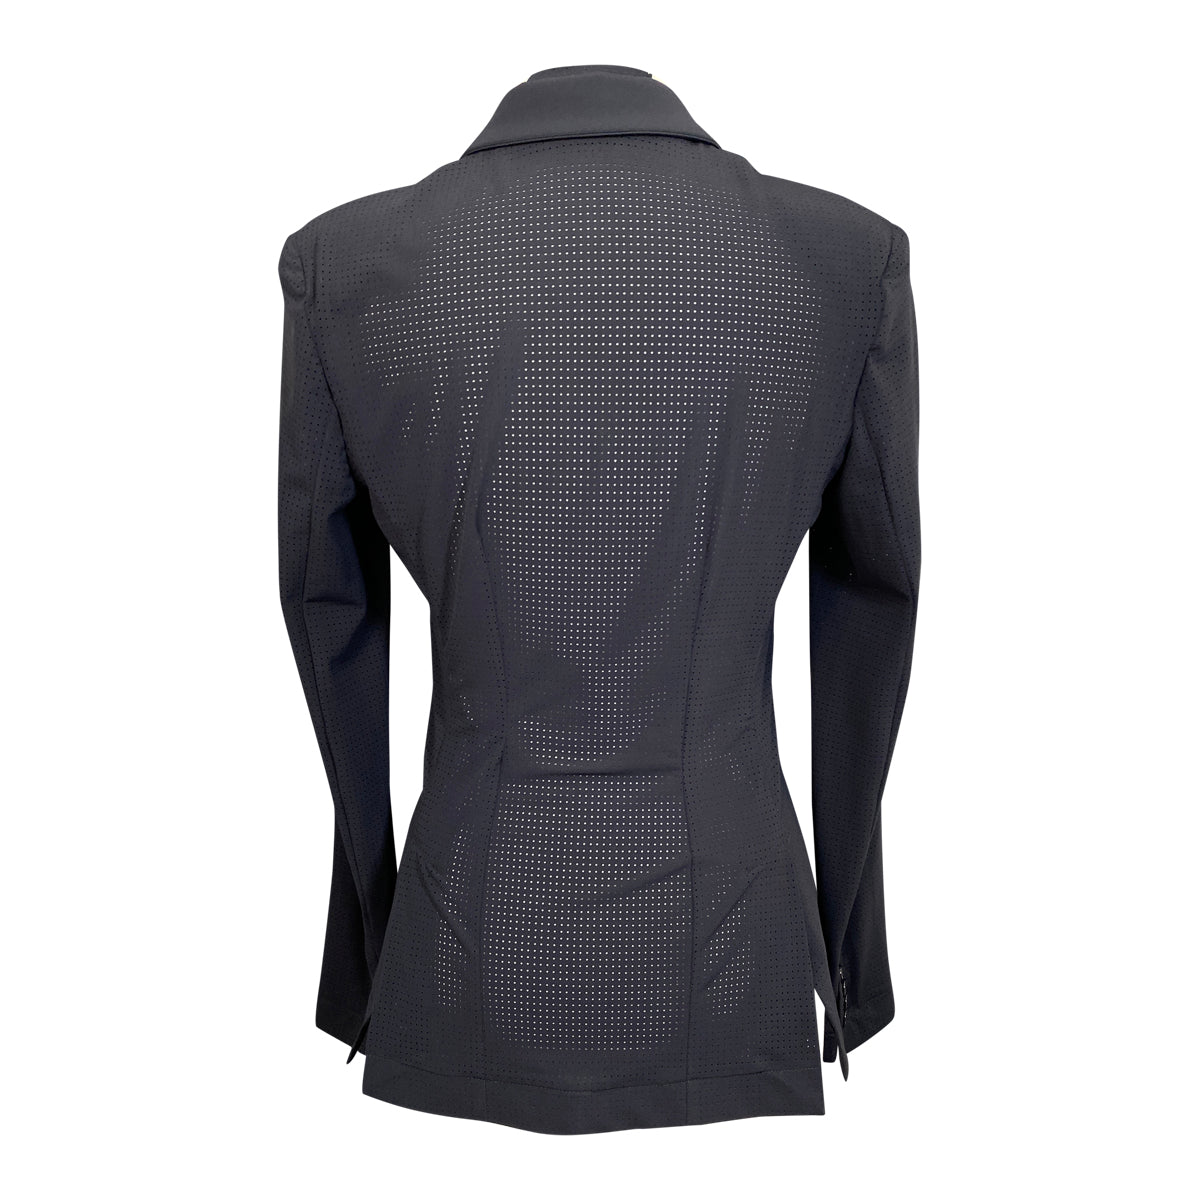 Dada Sport 'Cadence' Perforated Show Jacket in Black